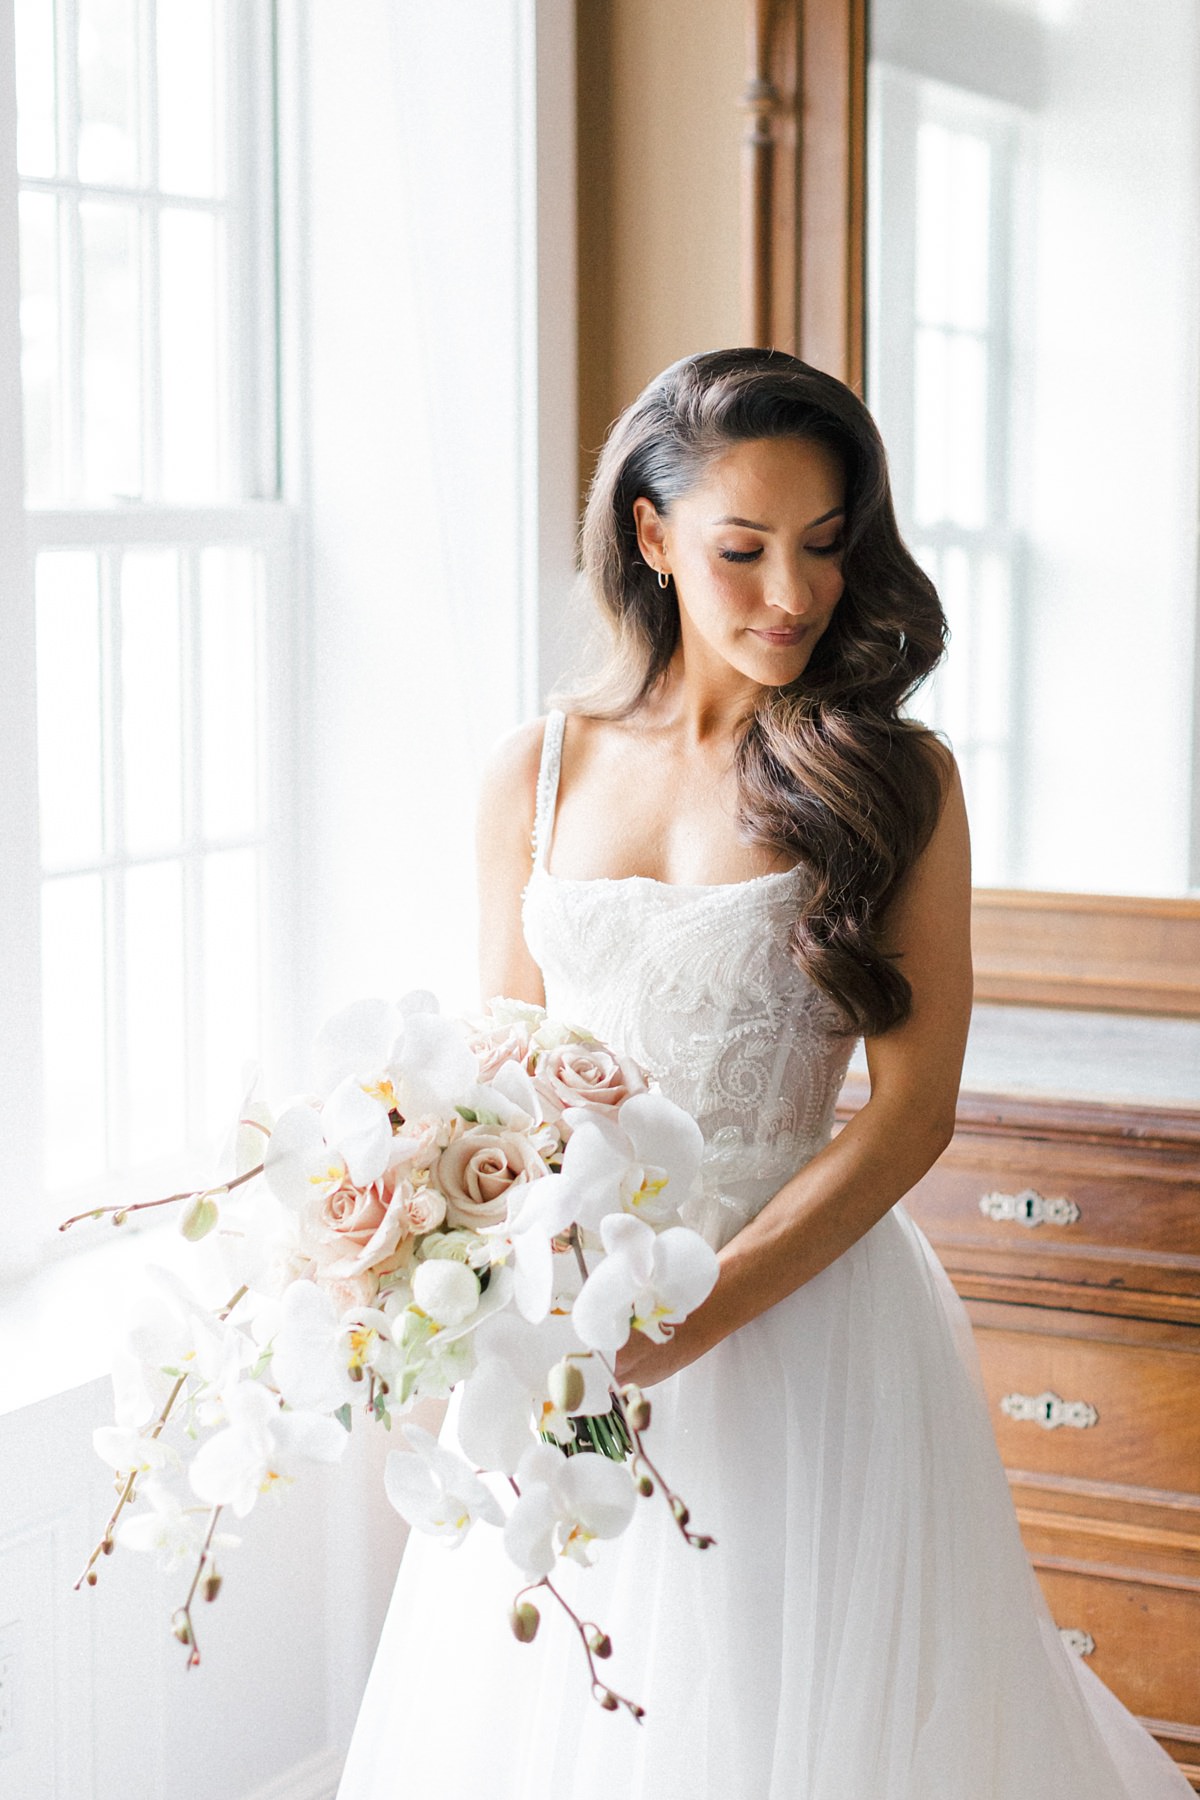 5 Getting Ready Photo Tips For Your Wedding Day